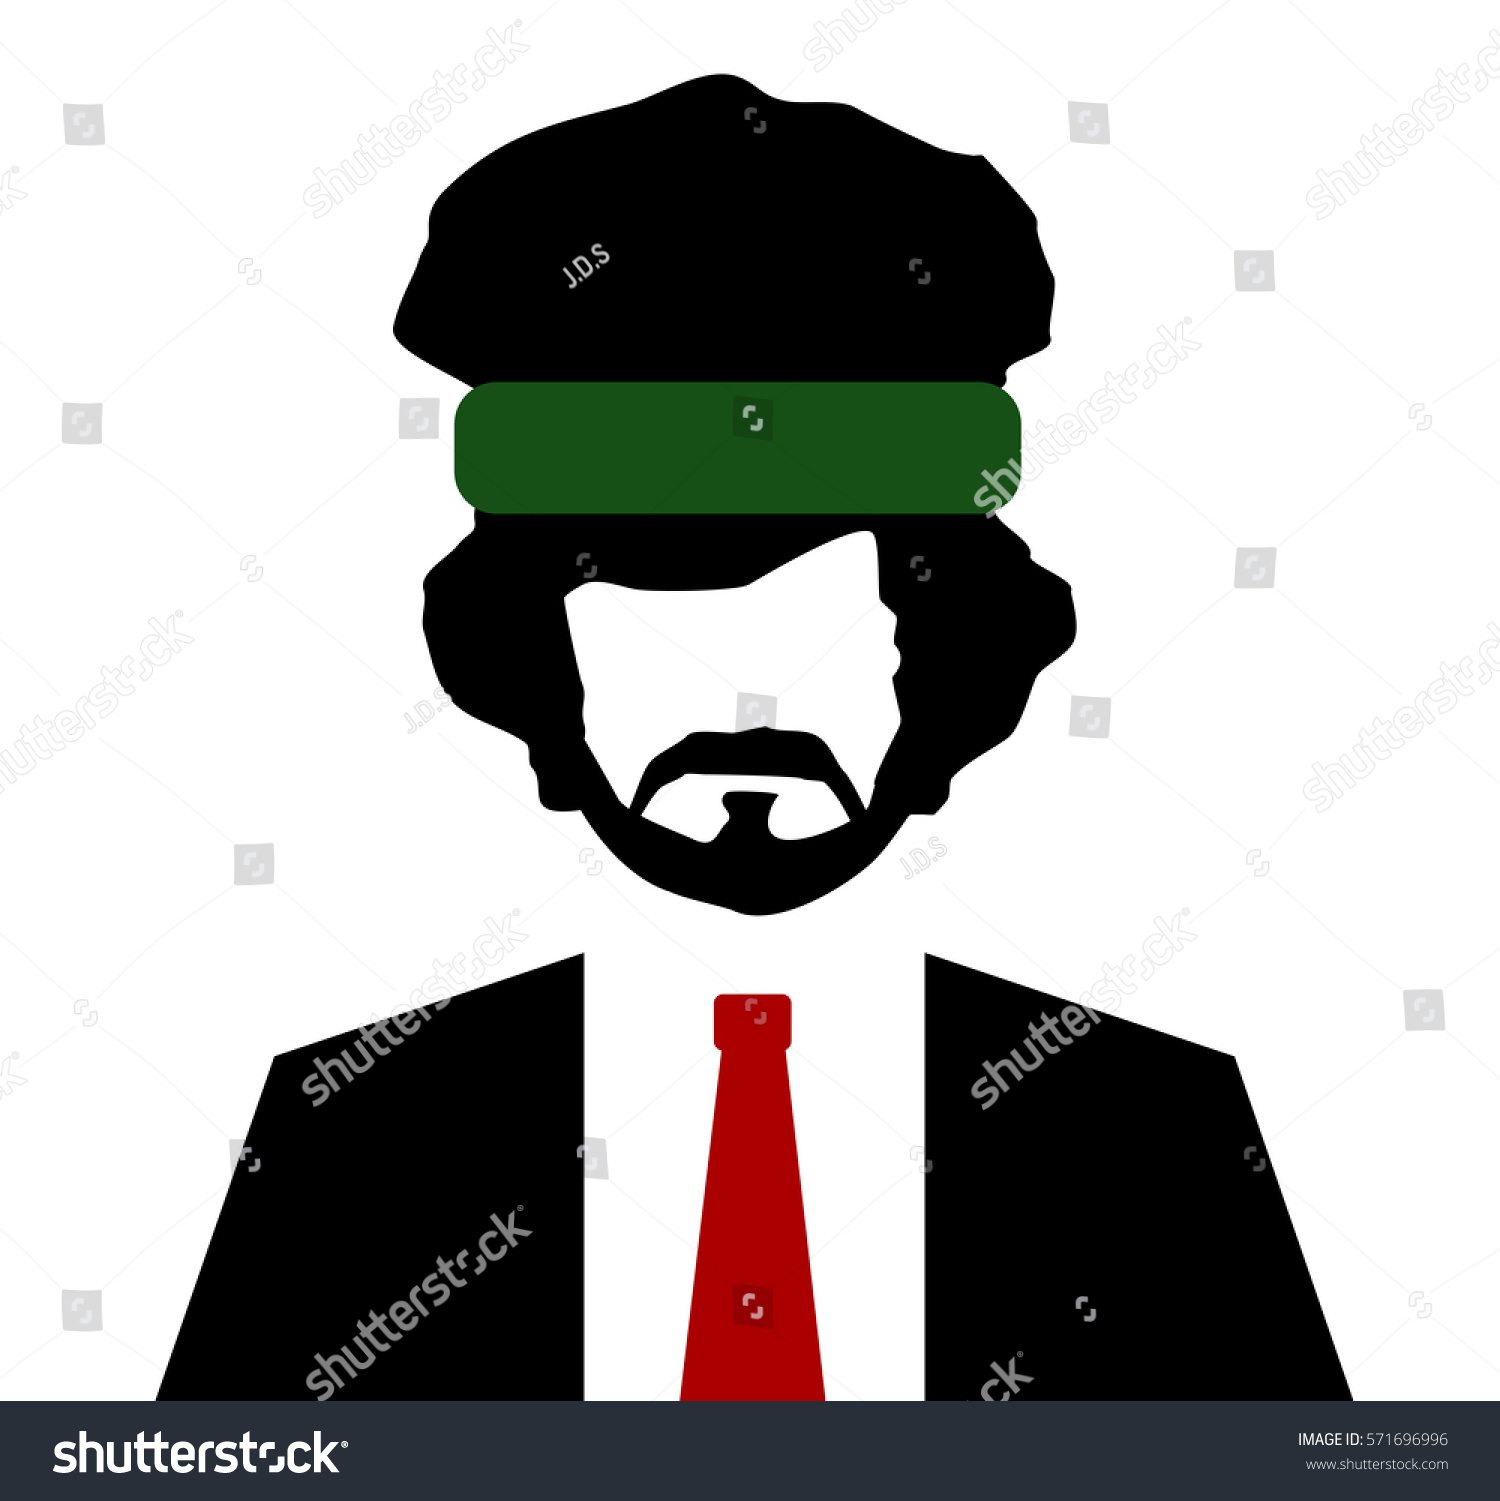 SVG of man wearing headband with suit and tie svg